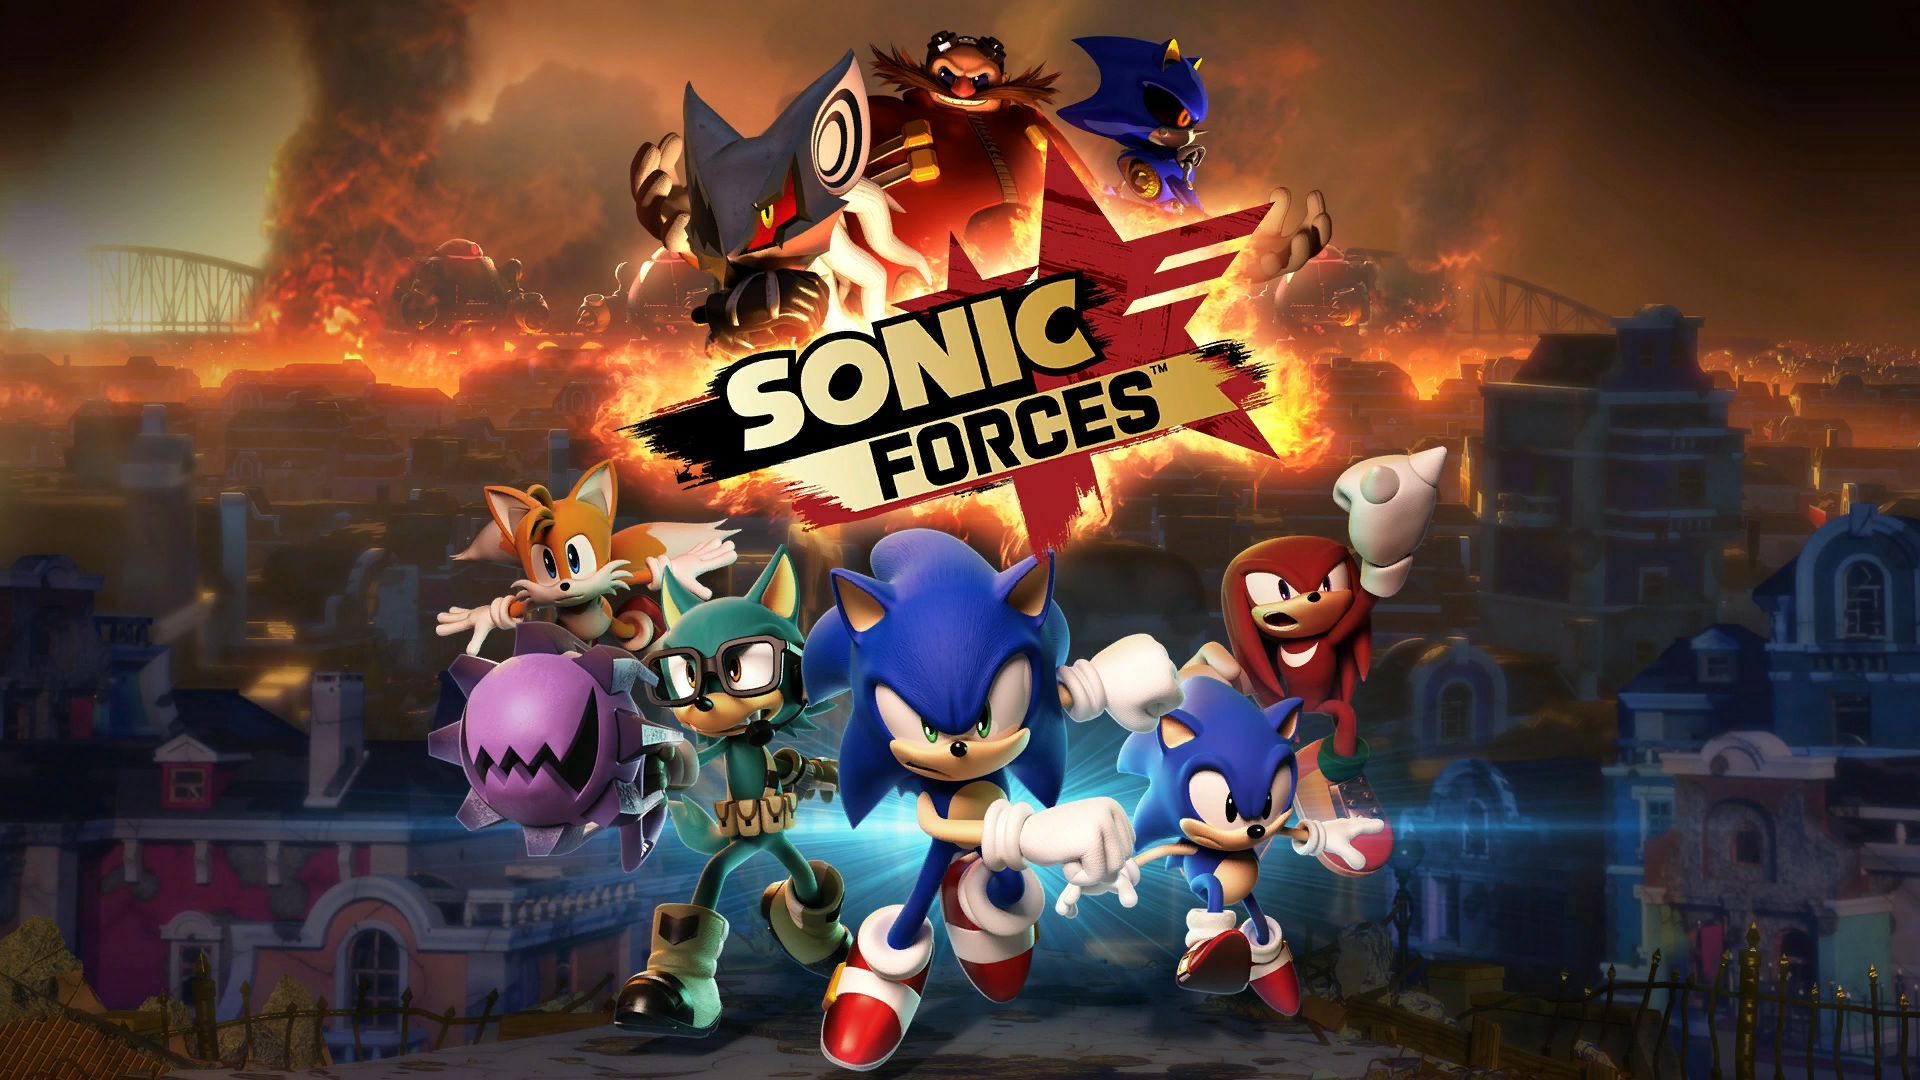 Sonic Forces PS4 XBONE Startup Screen Wallpaper. Game Codes